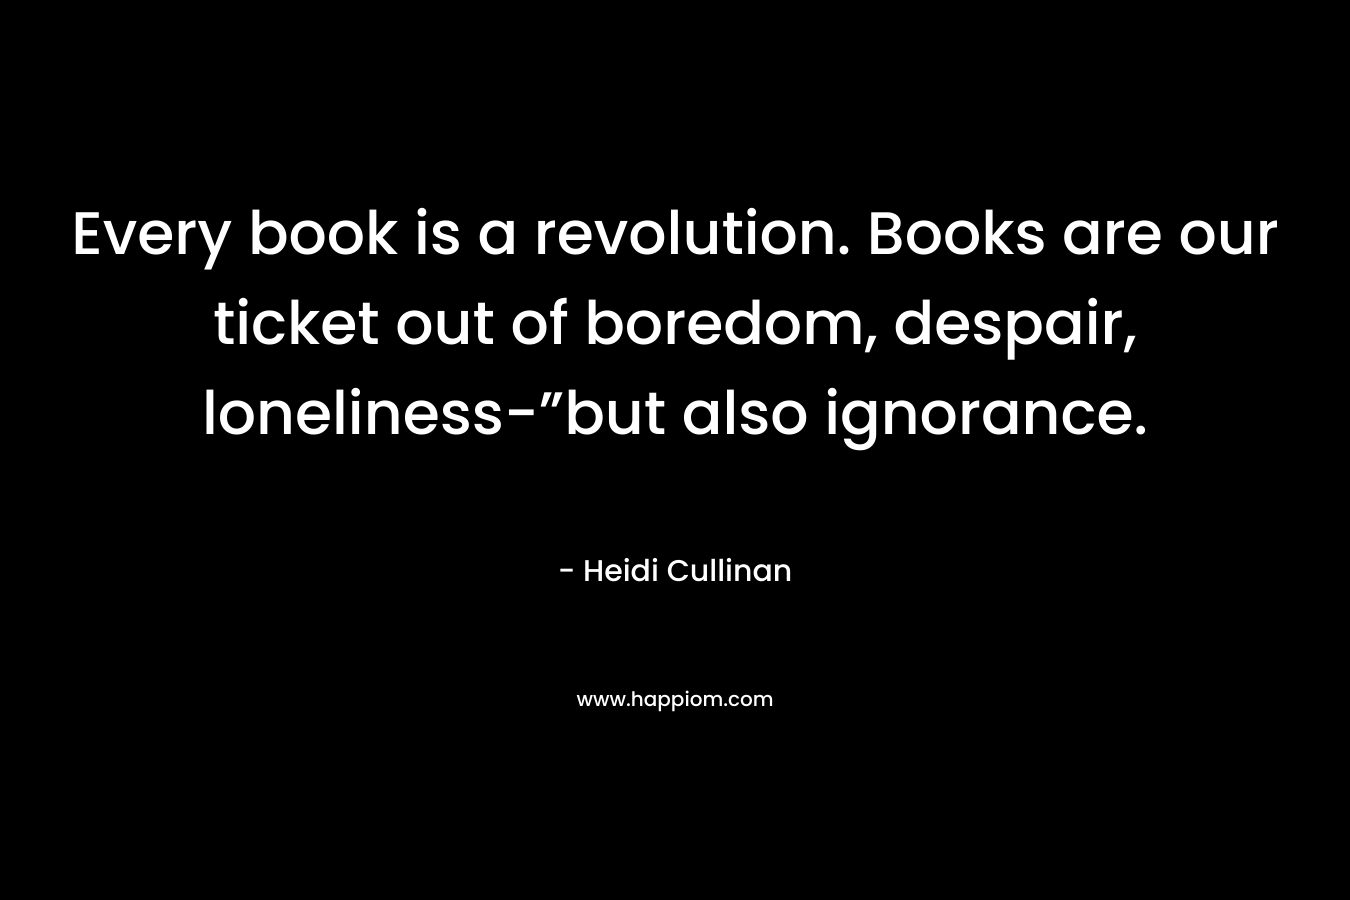 Every book is a revolution. Books are our ticket out of boredom, despair, loneliness-”but also ignorance. – Heidi Cullinan